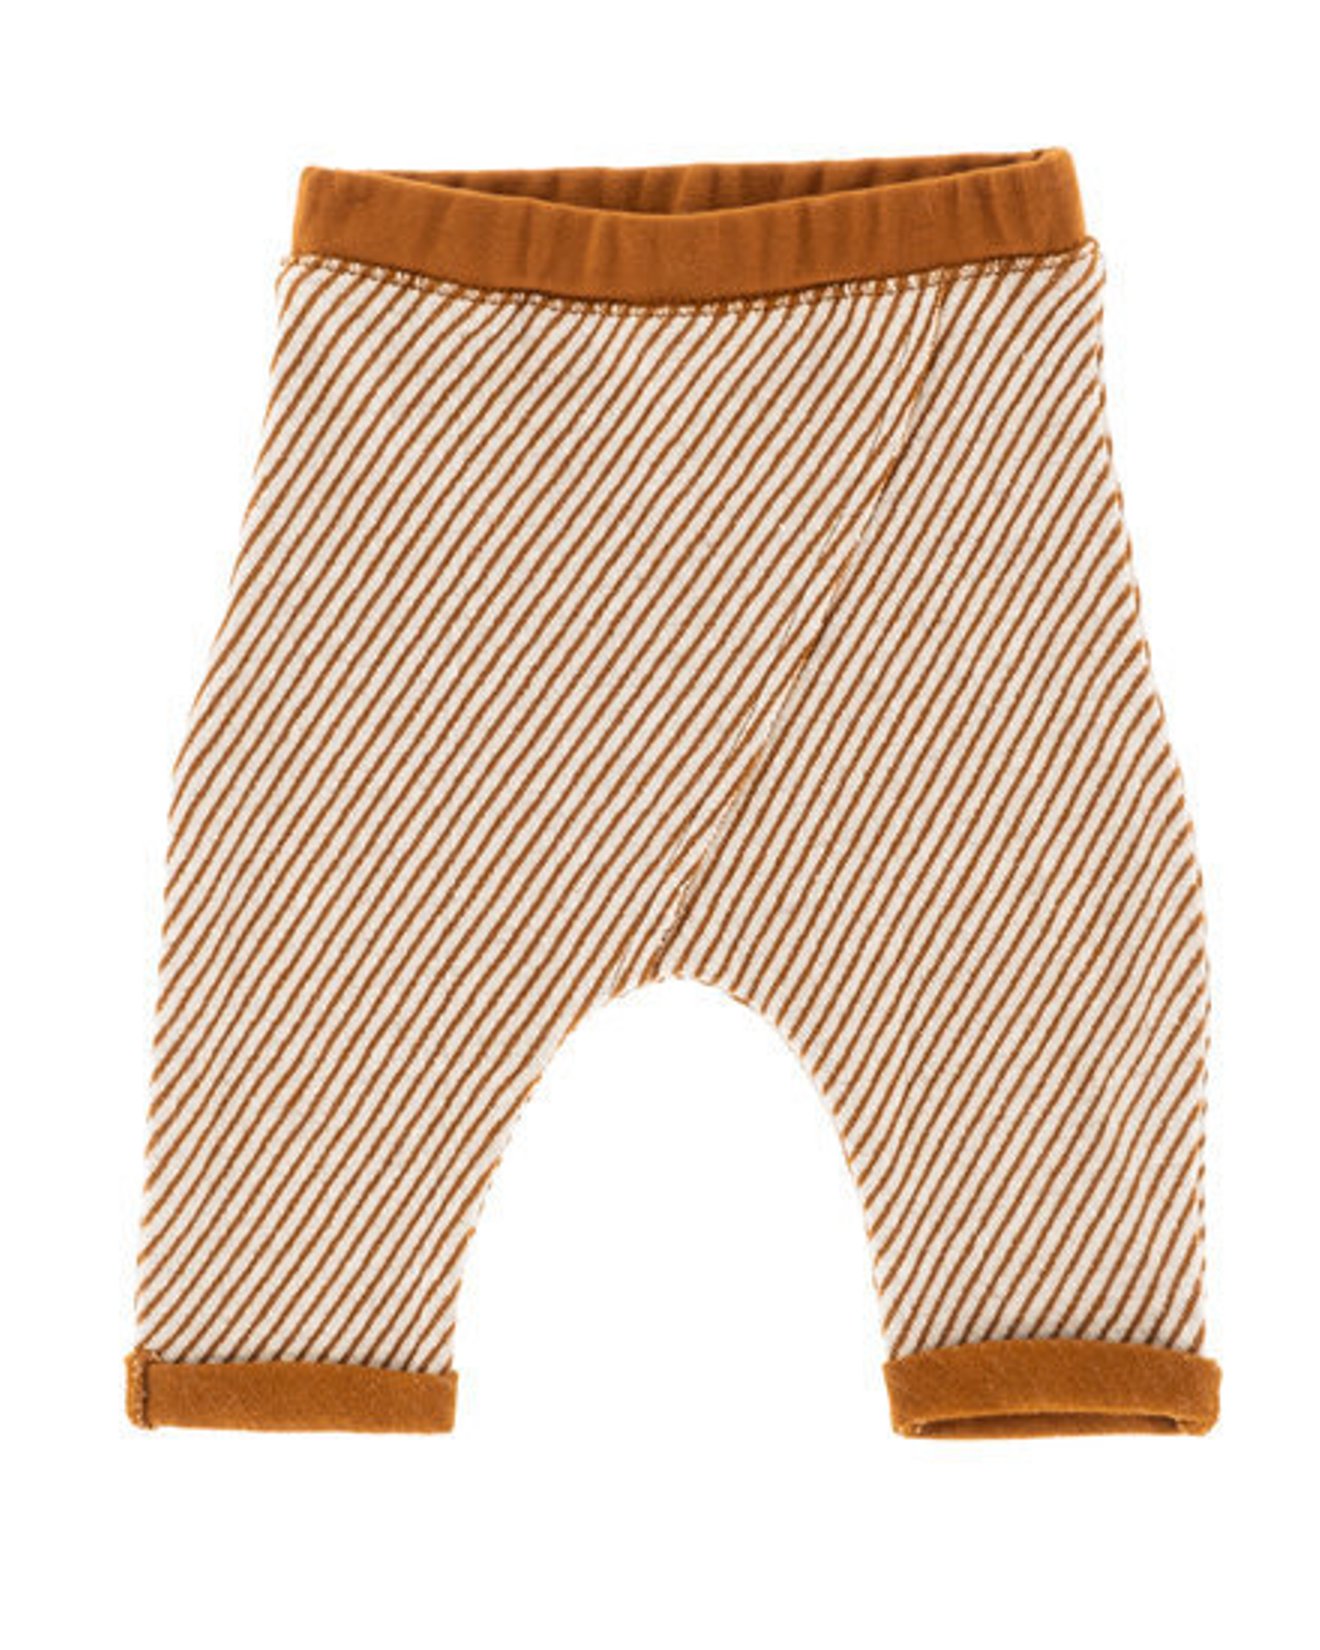 Riffle Amsterdam Baggy Hose combo toffee